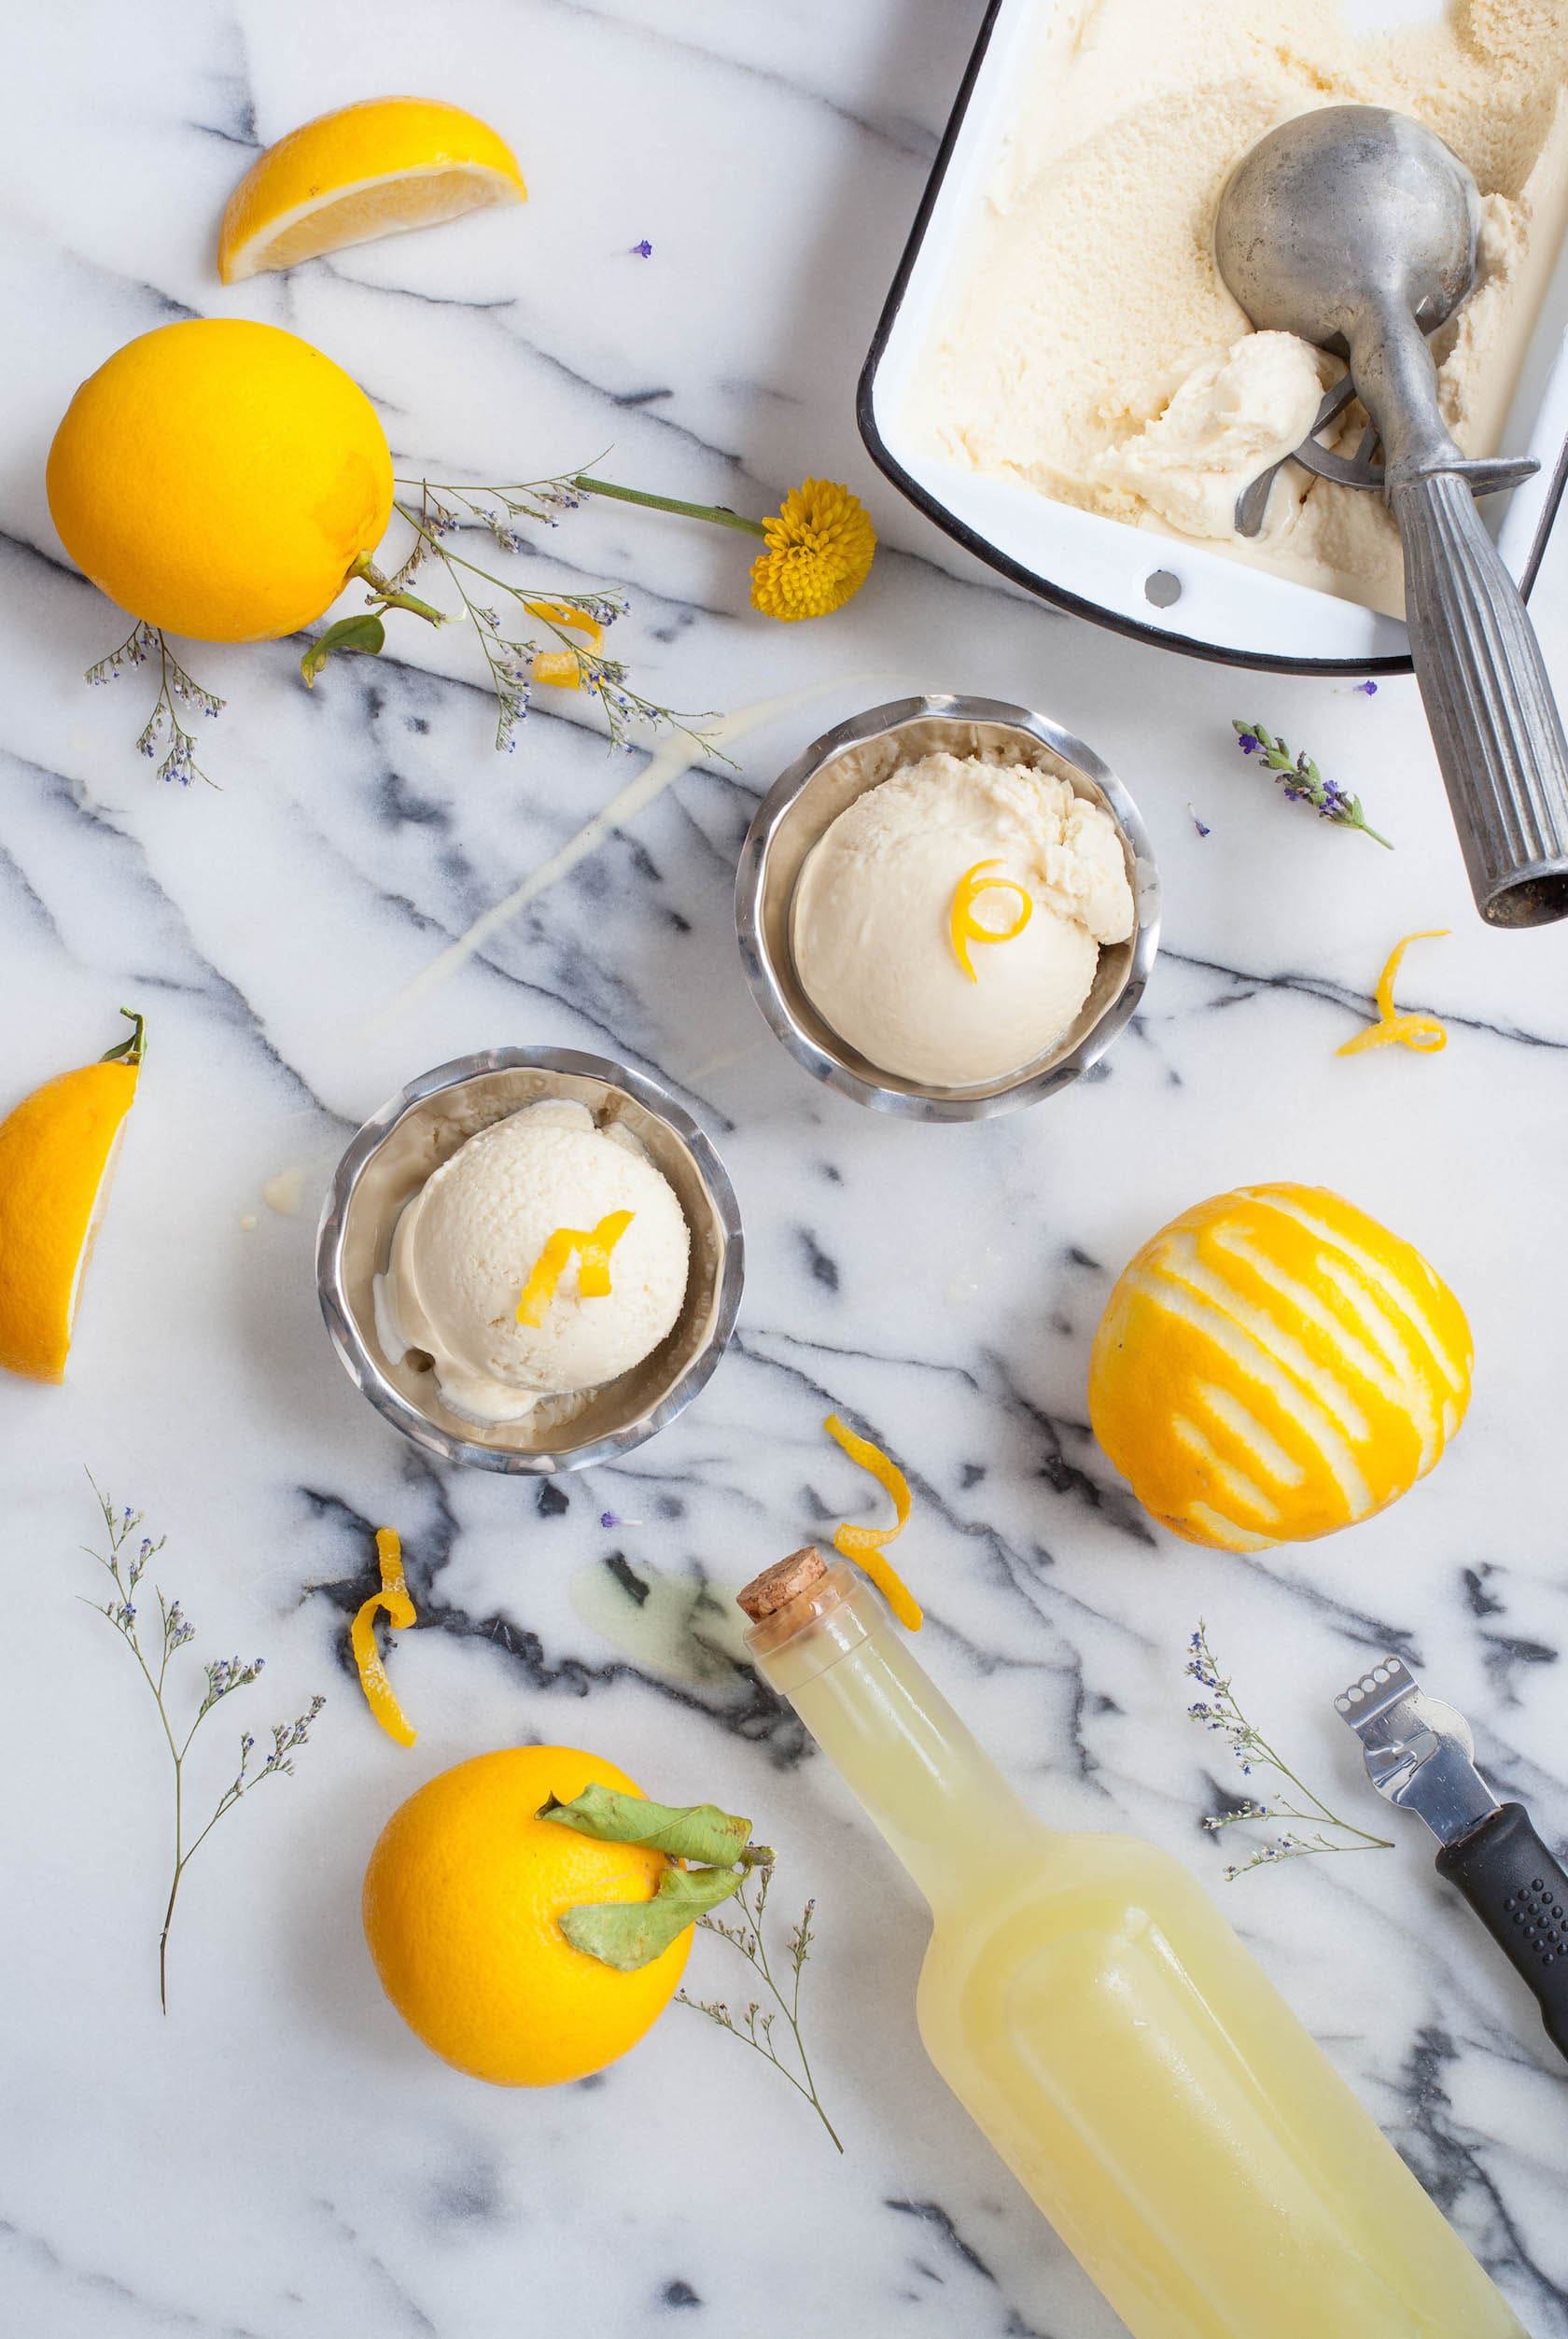 Limoncello Ice Cream from cleaneatingwithadirtymind.com on foodiecrush.com